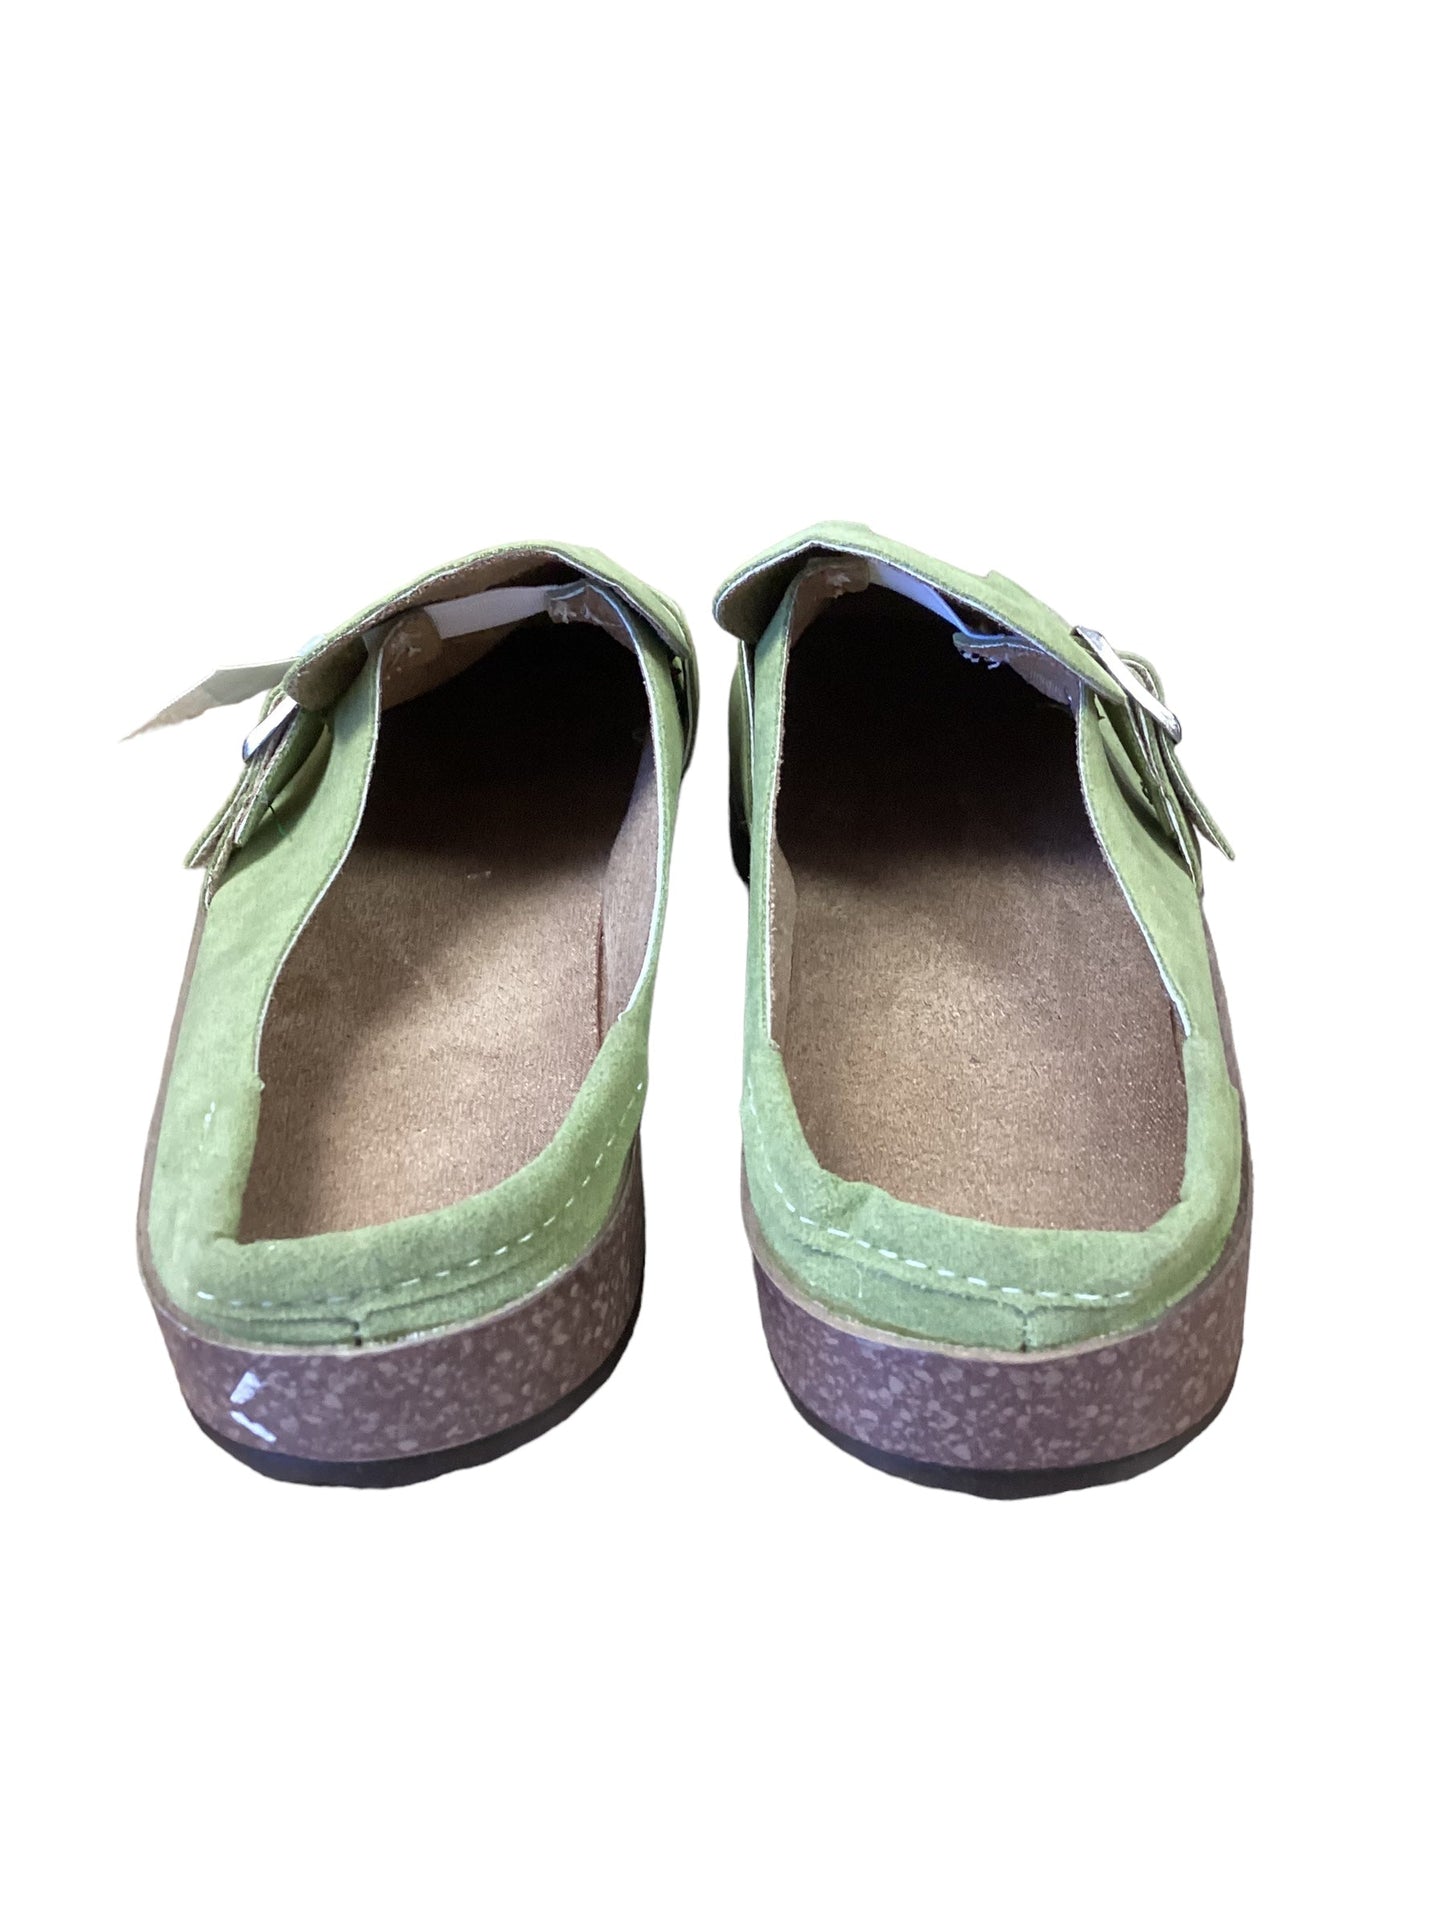 Green Shoes Flats Cmf, Size 7